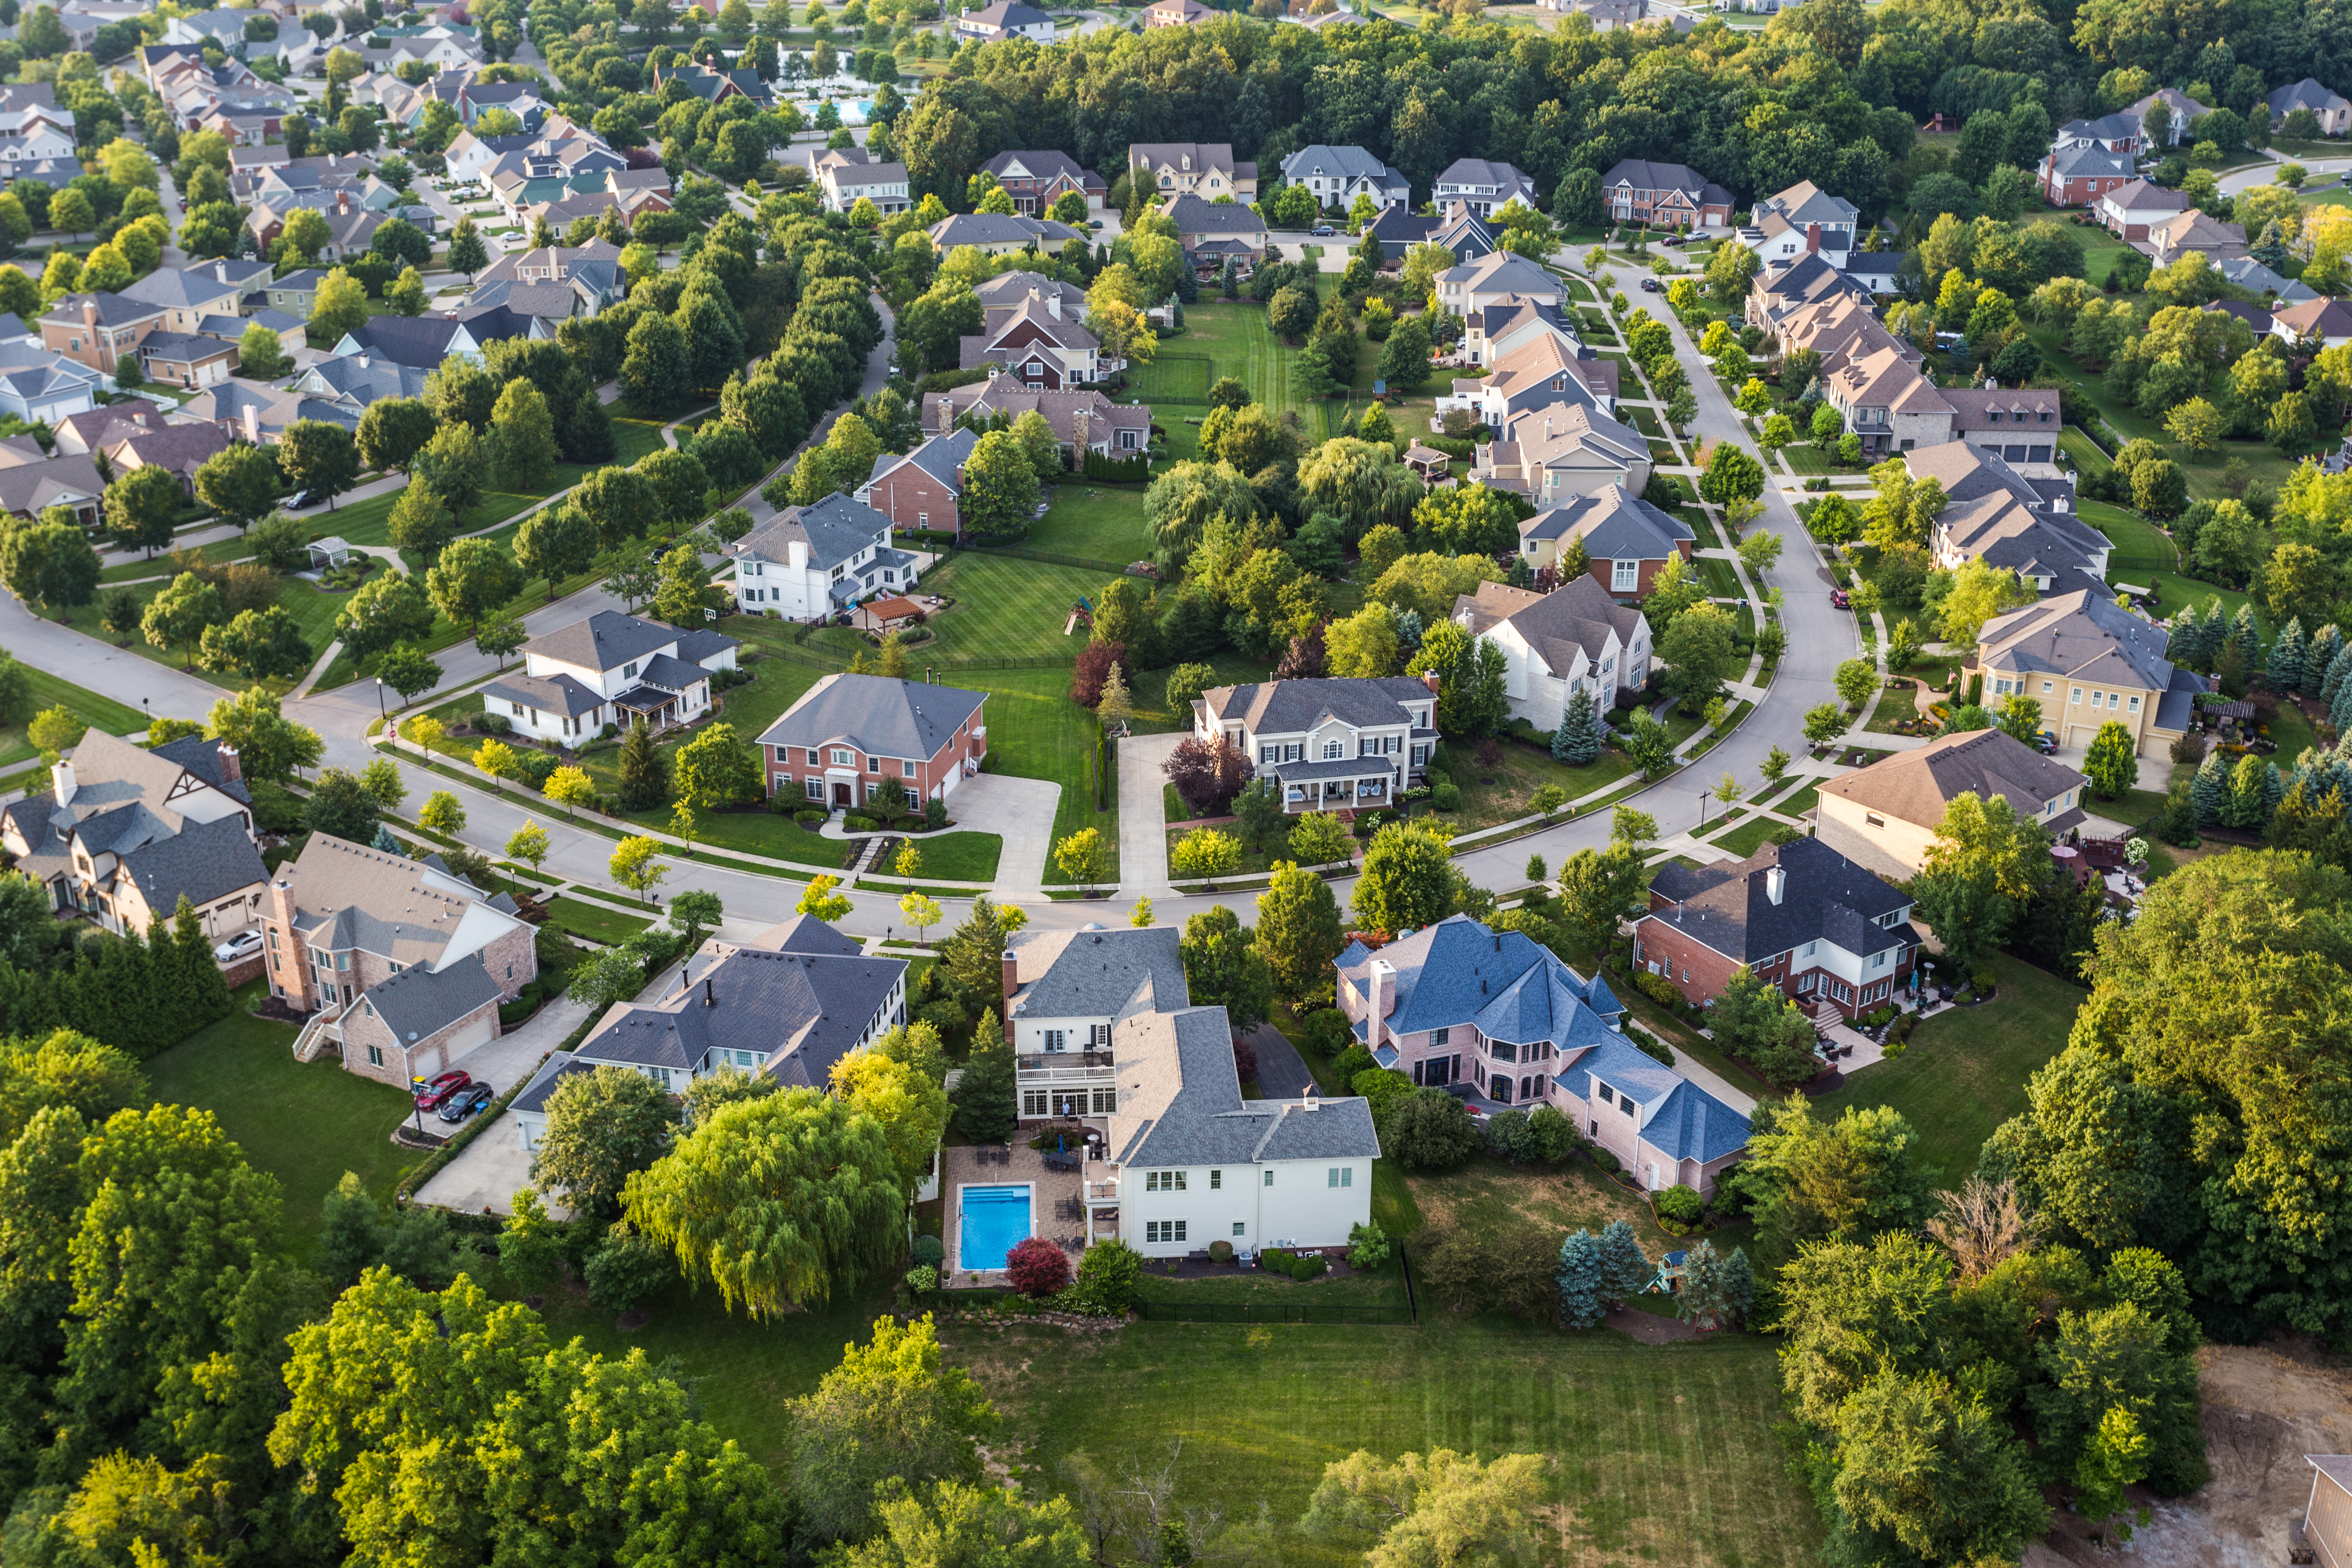 An aerial view of a suburban housing tract.